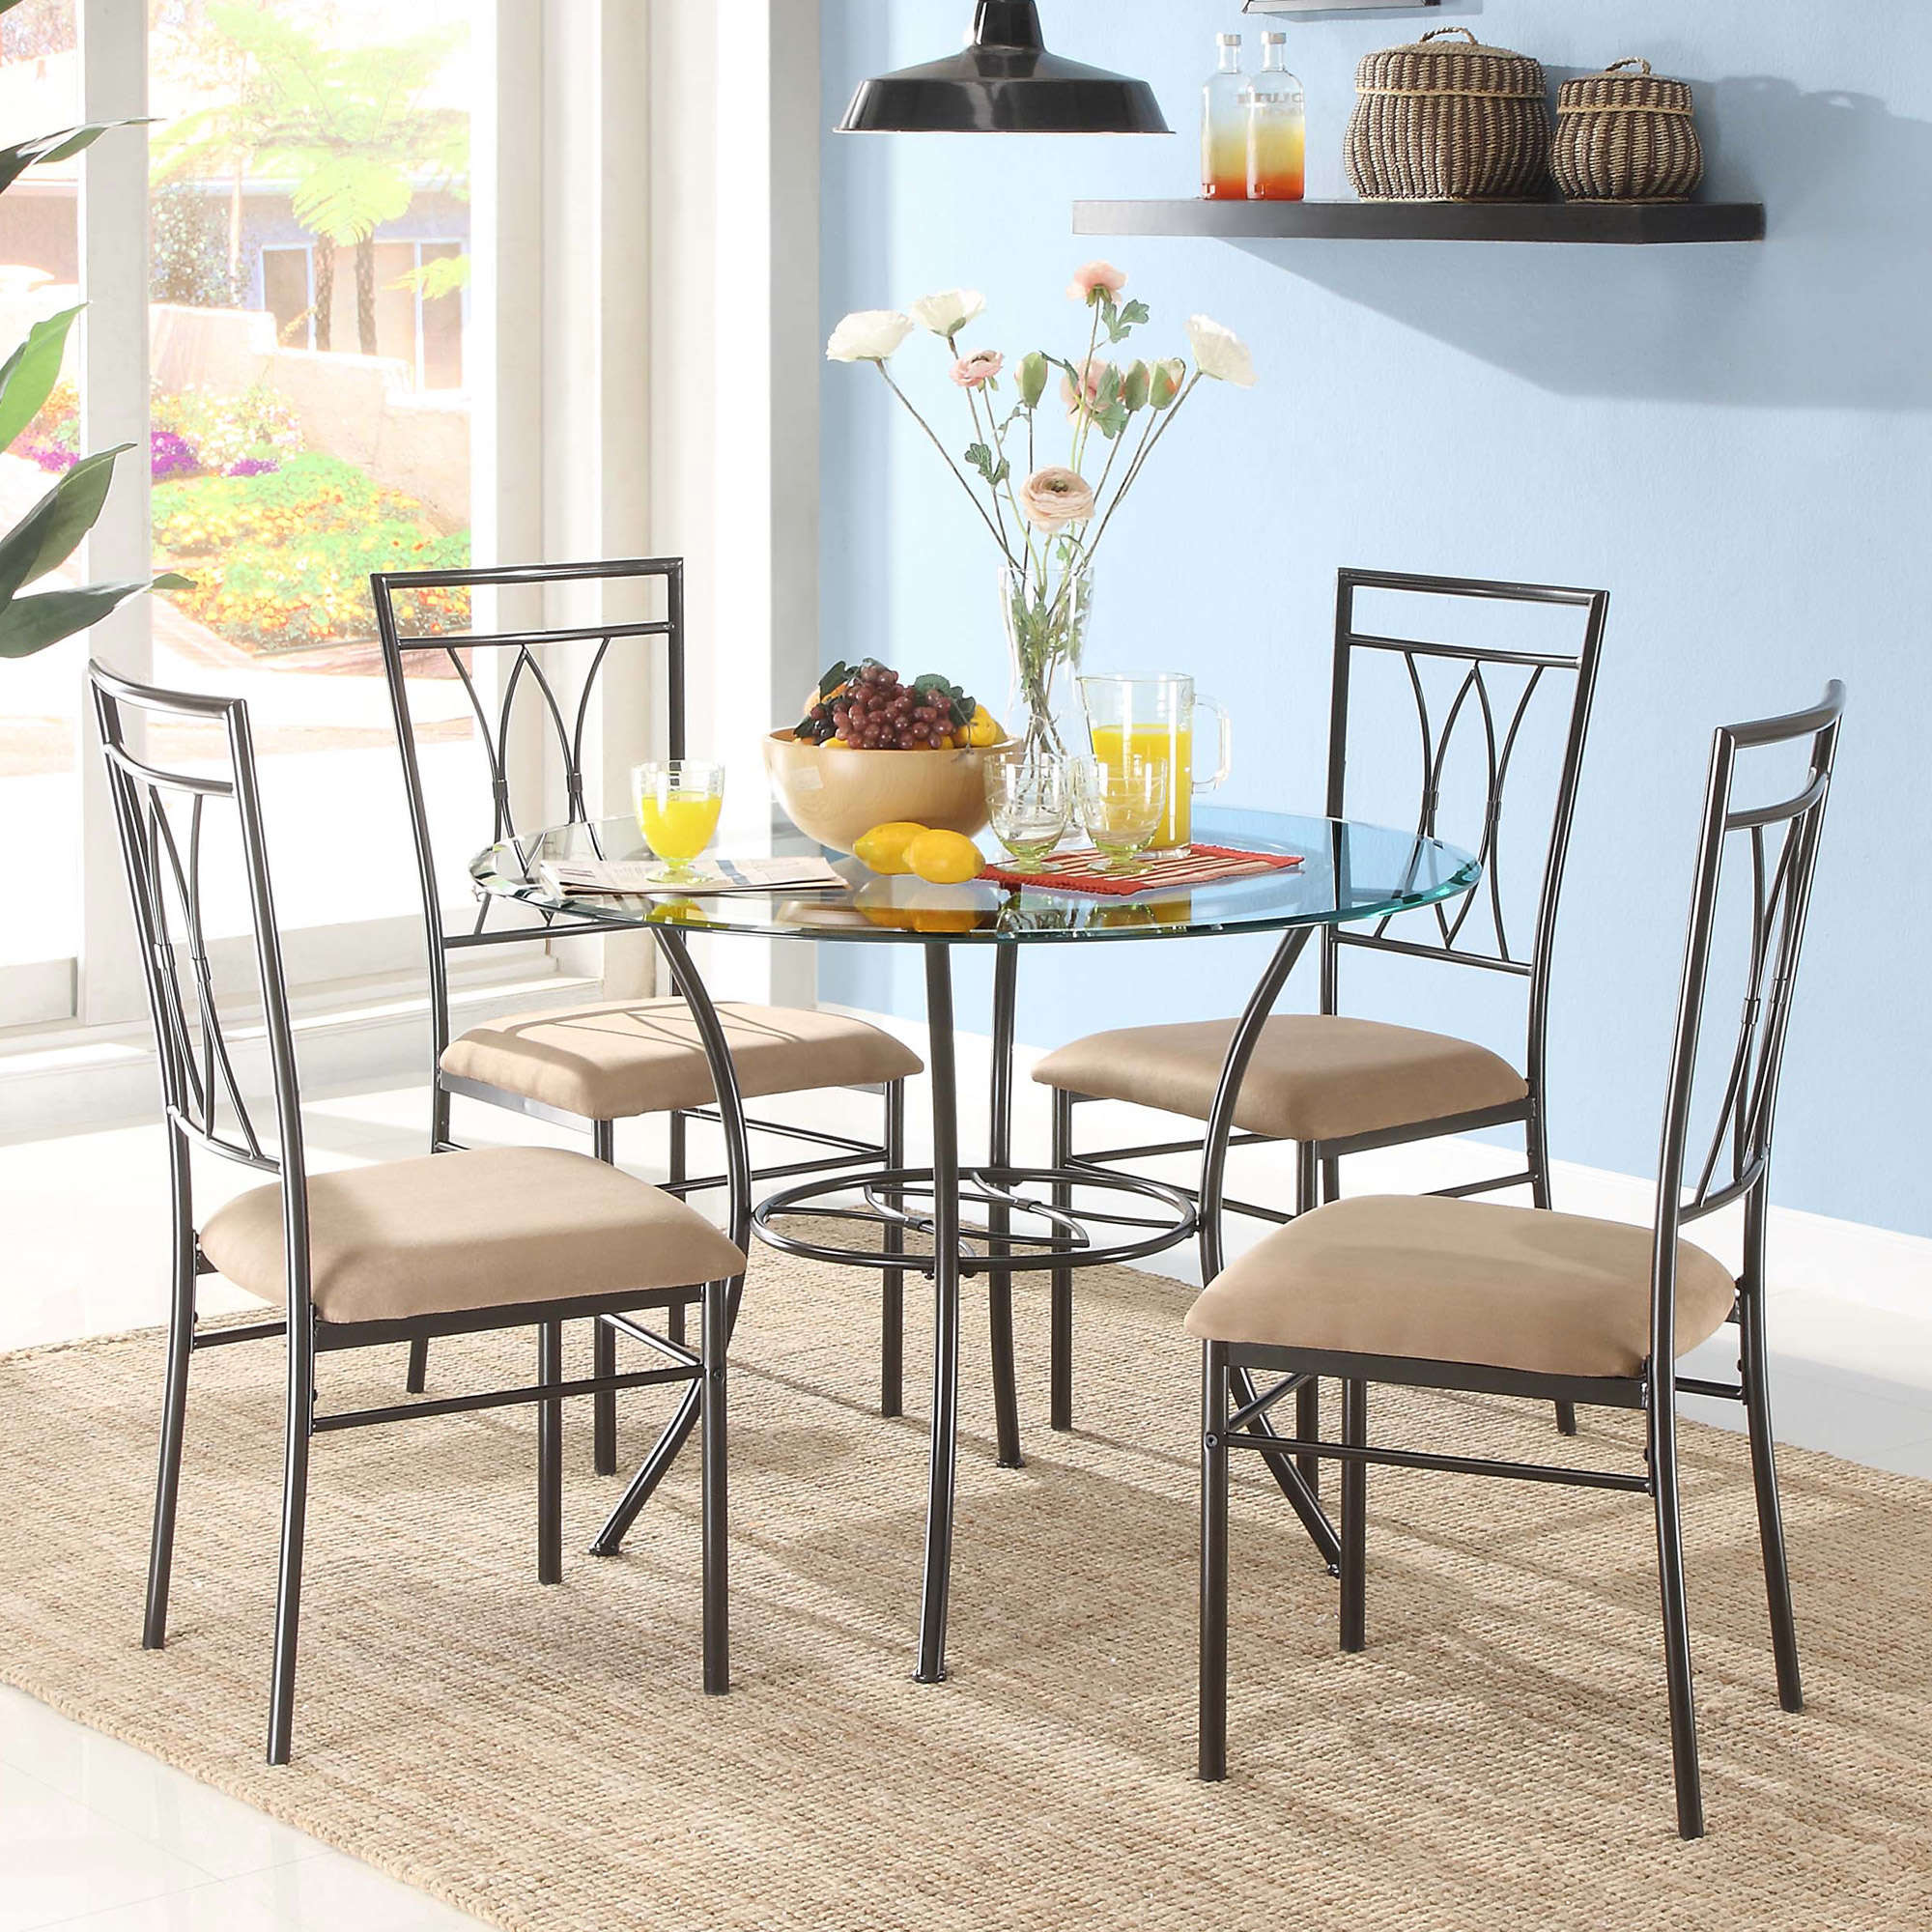 Mainstays 5-Piece Glass and Metal Dining Set